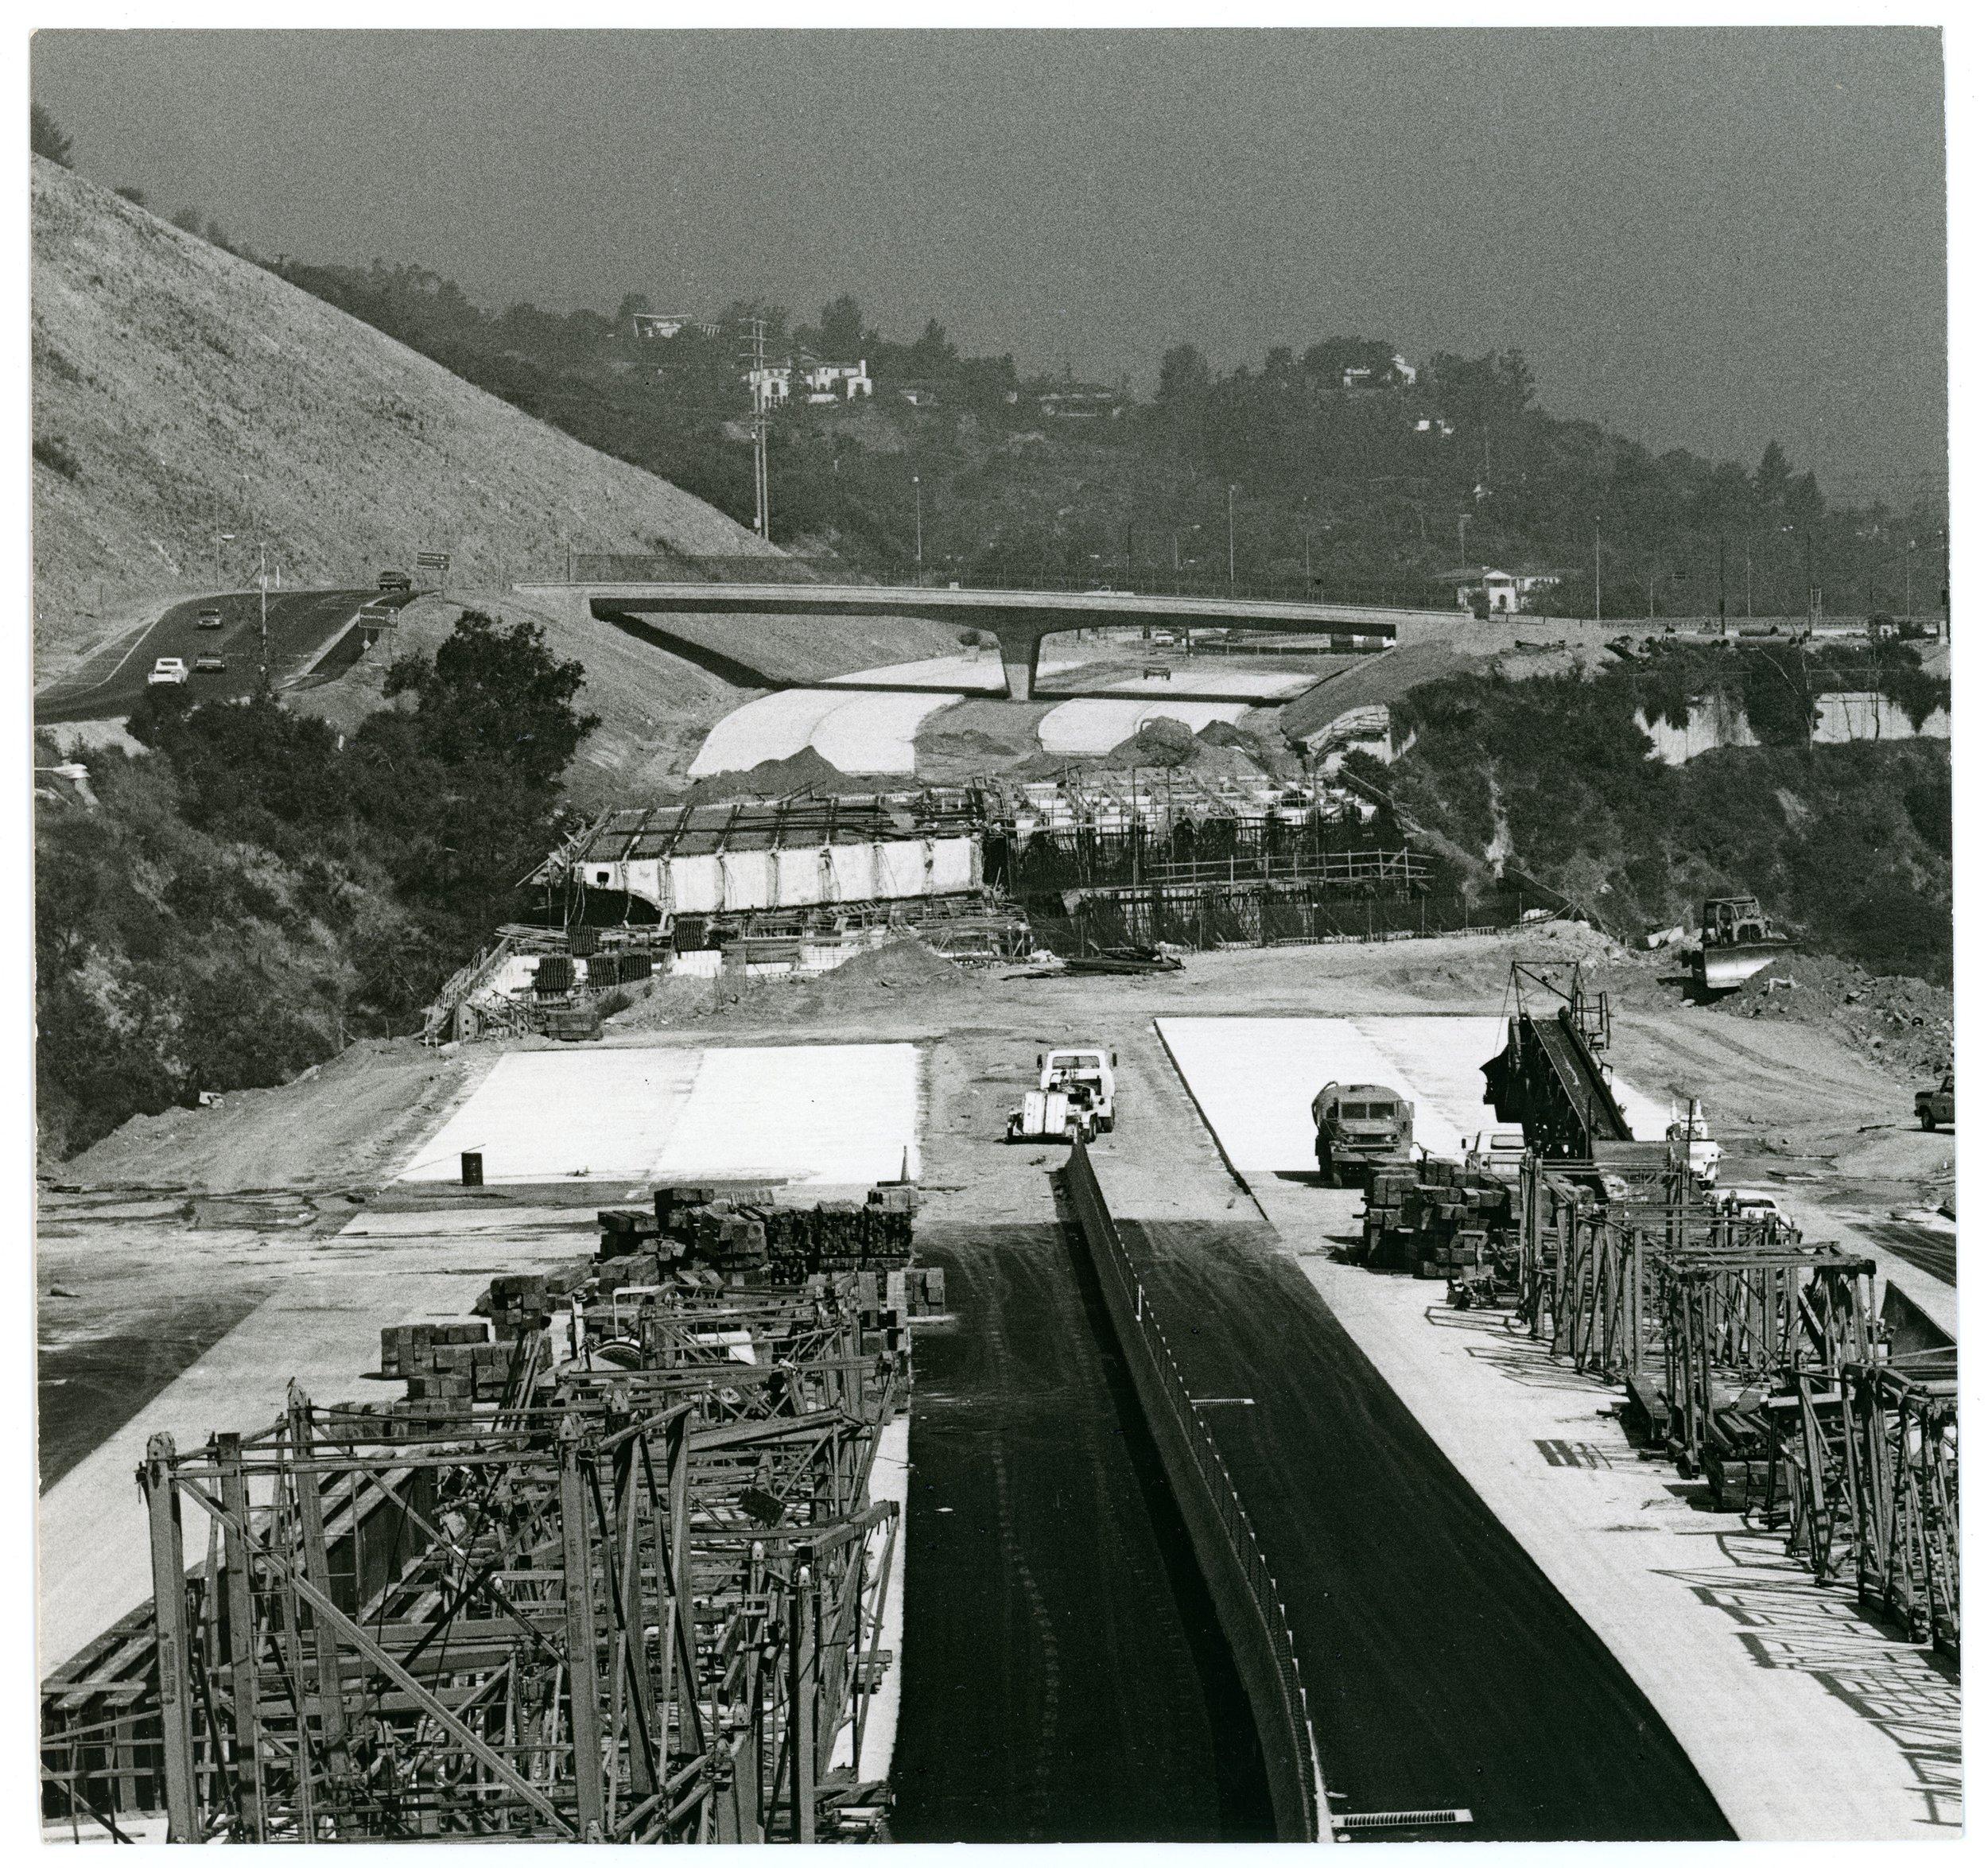  The Foothill Freeway under construction, c. 1971. Image from the  La Cañada Valley Sun  Photo Morgue in the Lanterman Archives. 